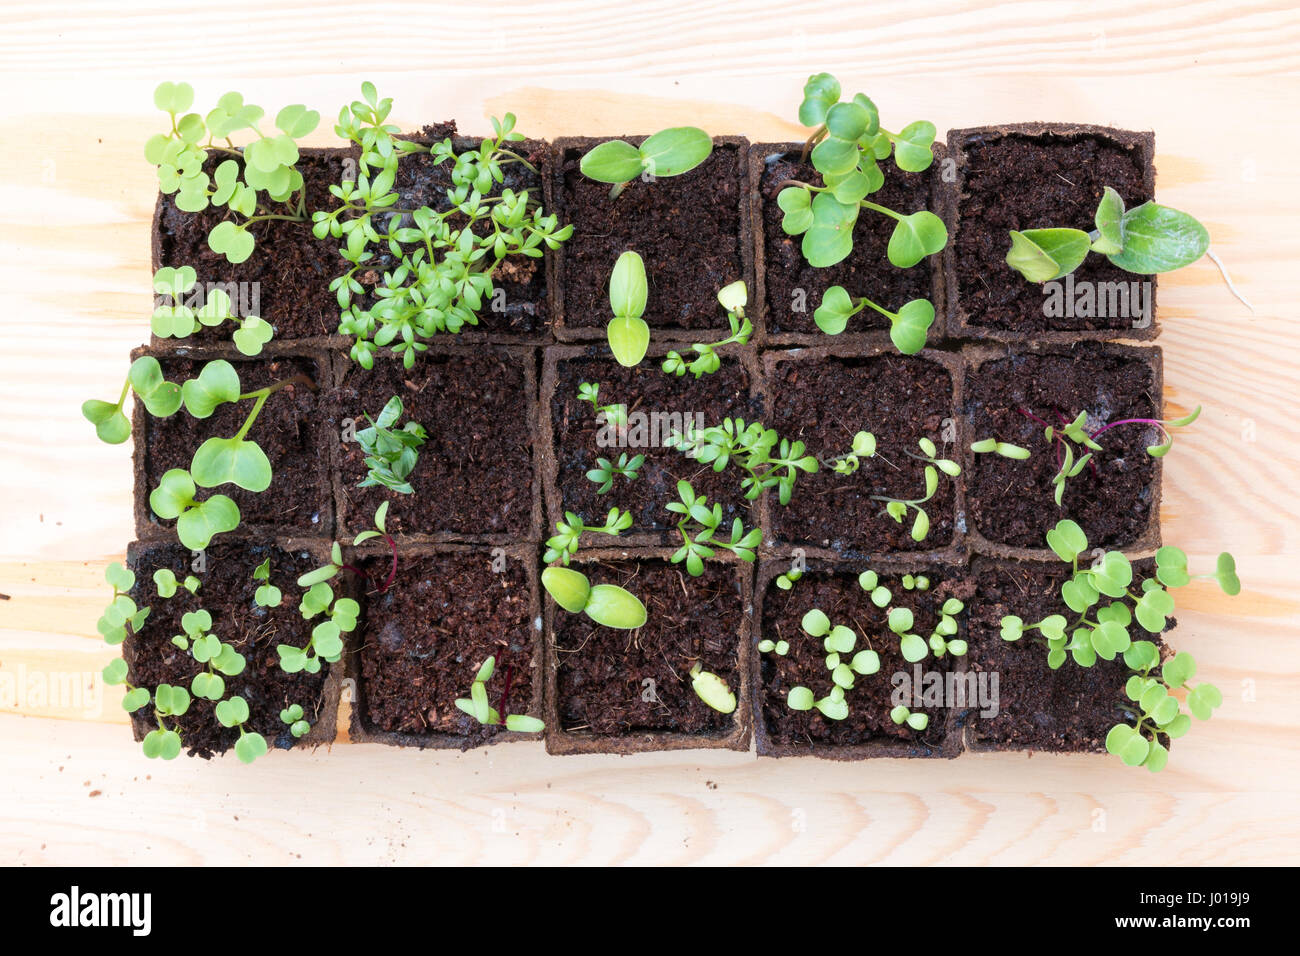 Top view of rows of peat pots with young fresh seedlings of herbs and vegetables Stock Photo